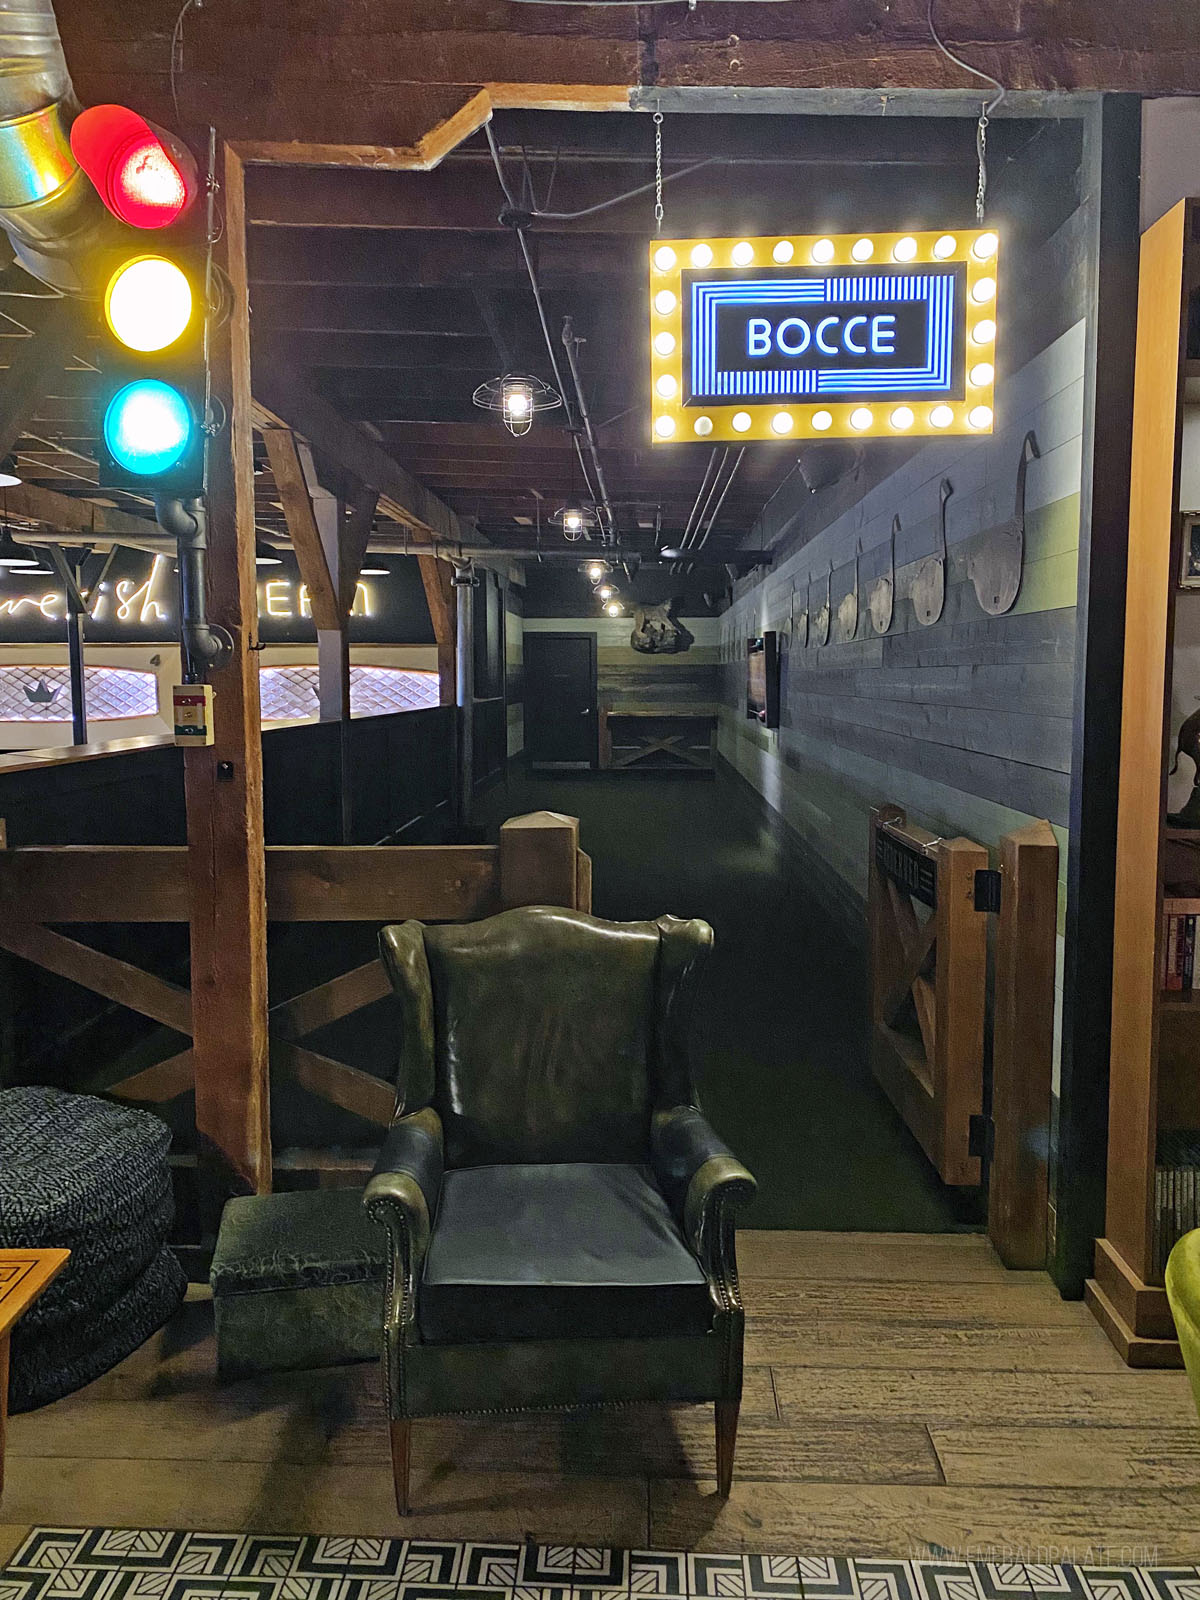 bocce ball, a must on your weekend in Kelowna